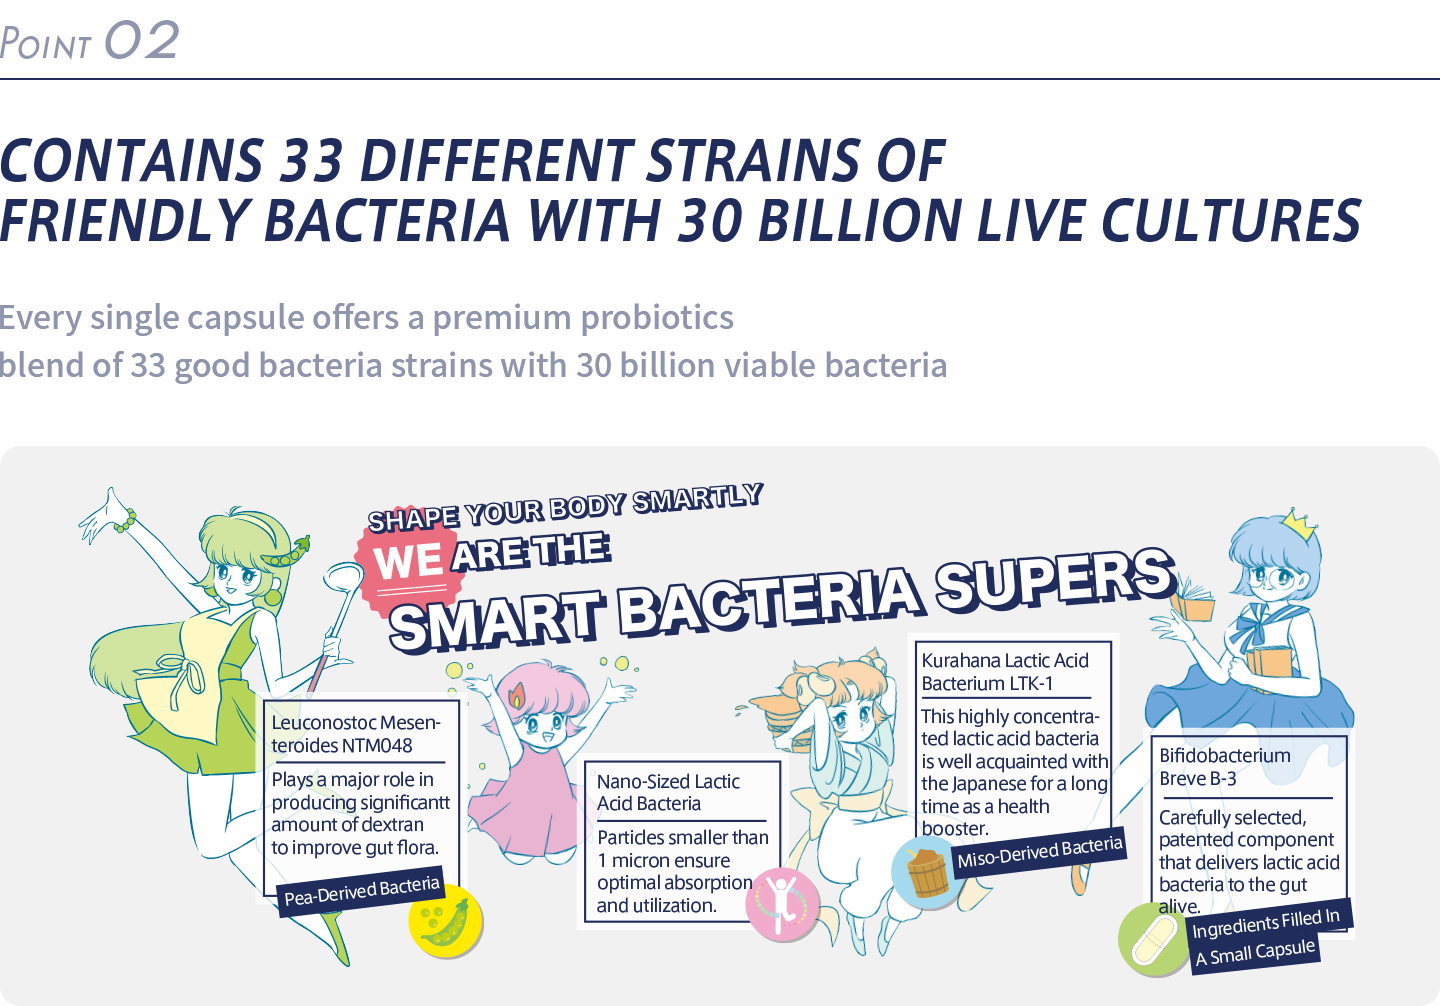 CONTAINS 33 DIFFERENT STRAINS OF FRIENDLY BACTERIA WITH 30 BILLION LIVE CULTURES